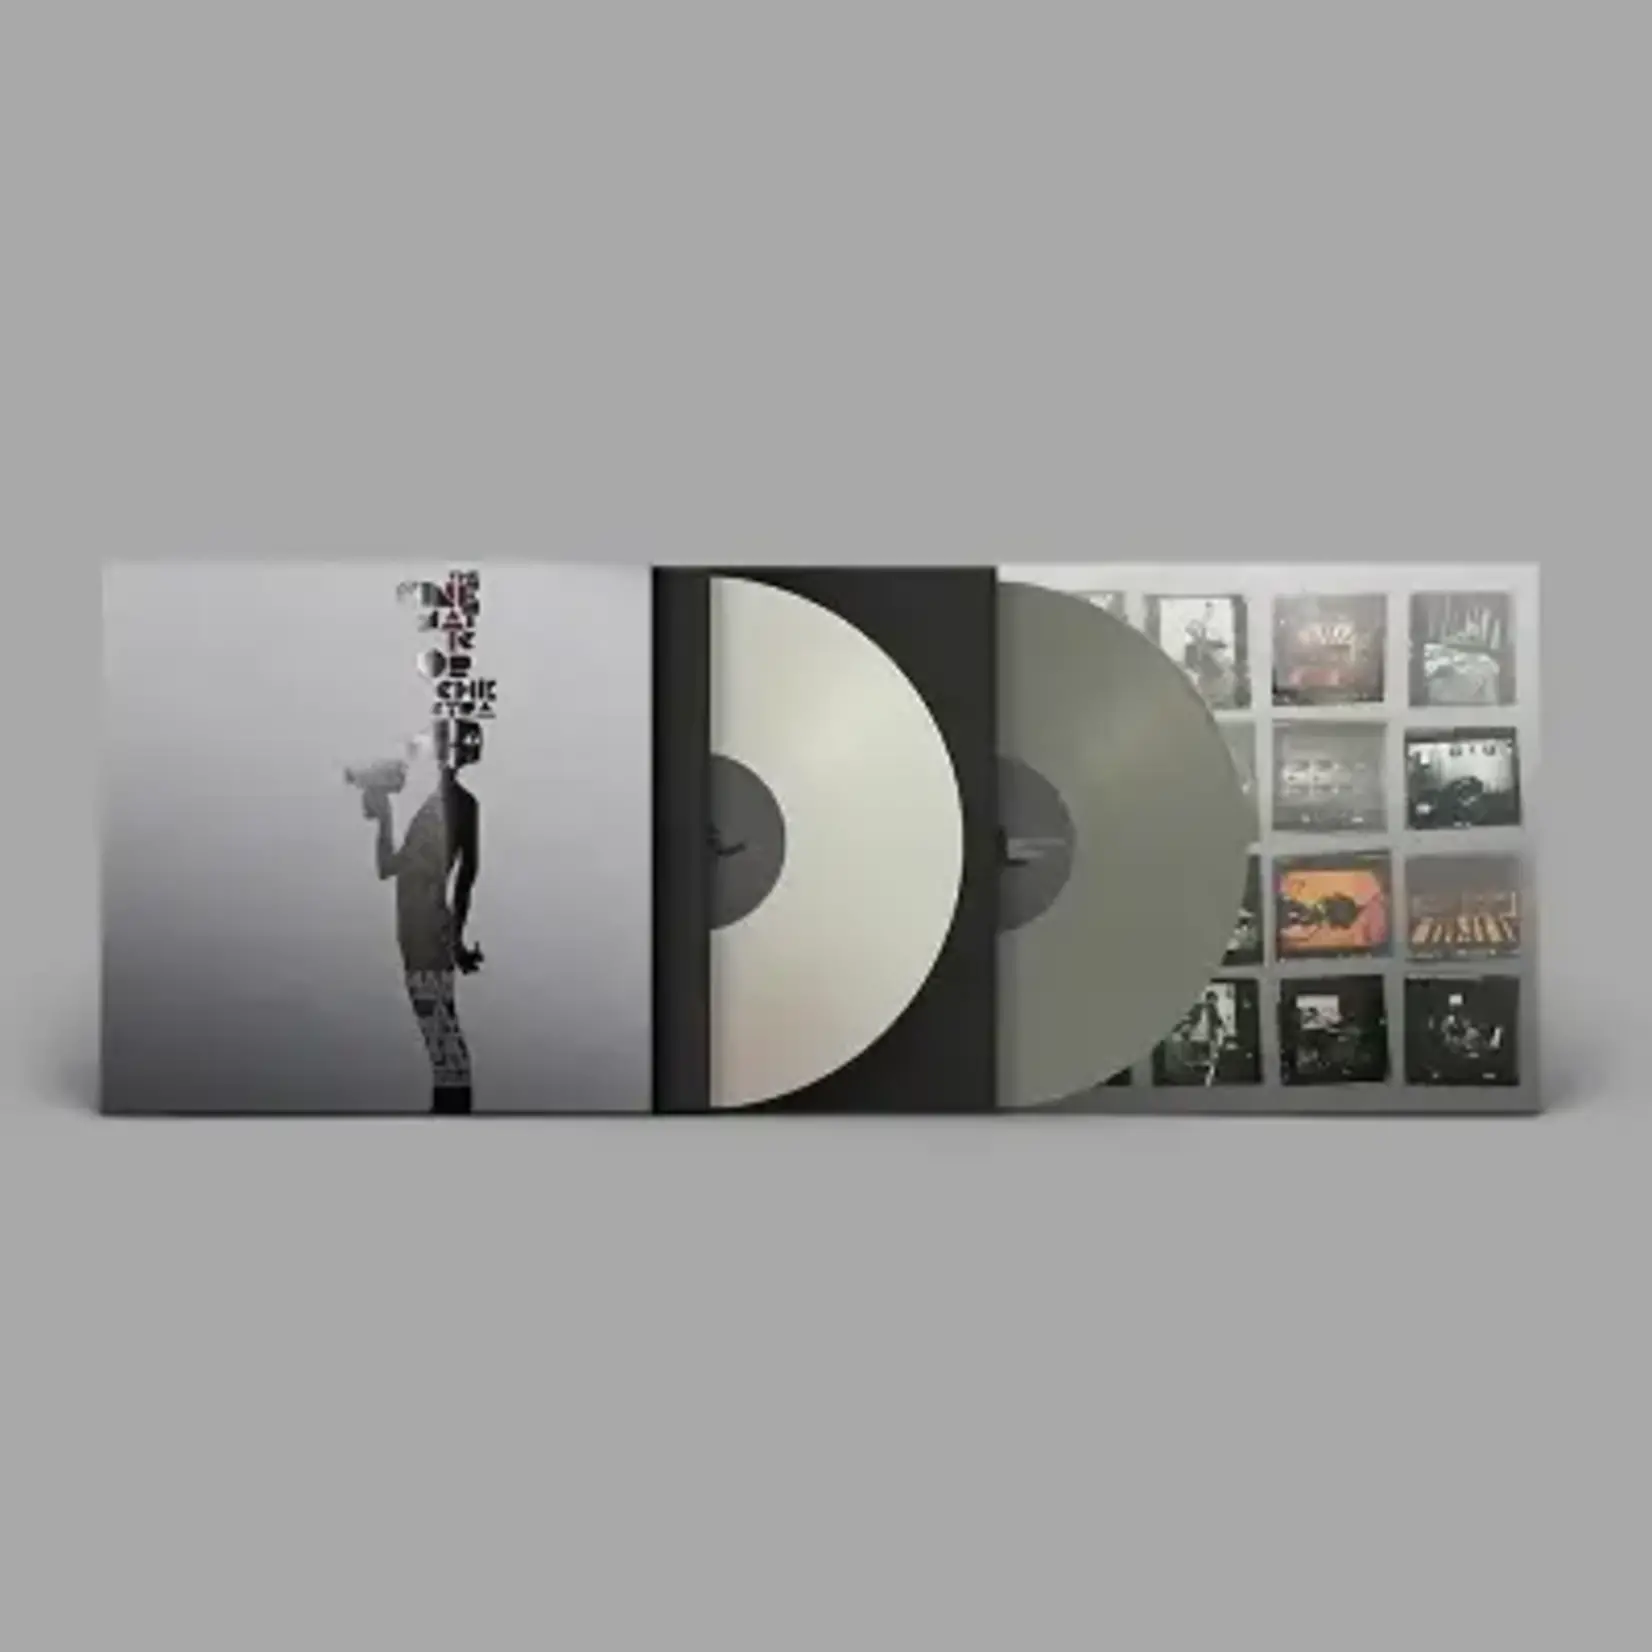 [New] The Cinematic Orchestra - Man With A Movie Camera (2LP) 20th Anniversary Edition, ashen & pewter grey vinyl)